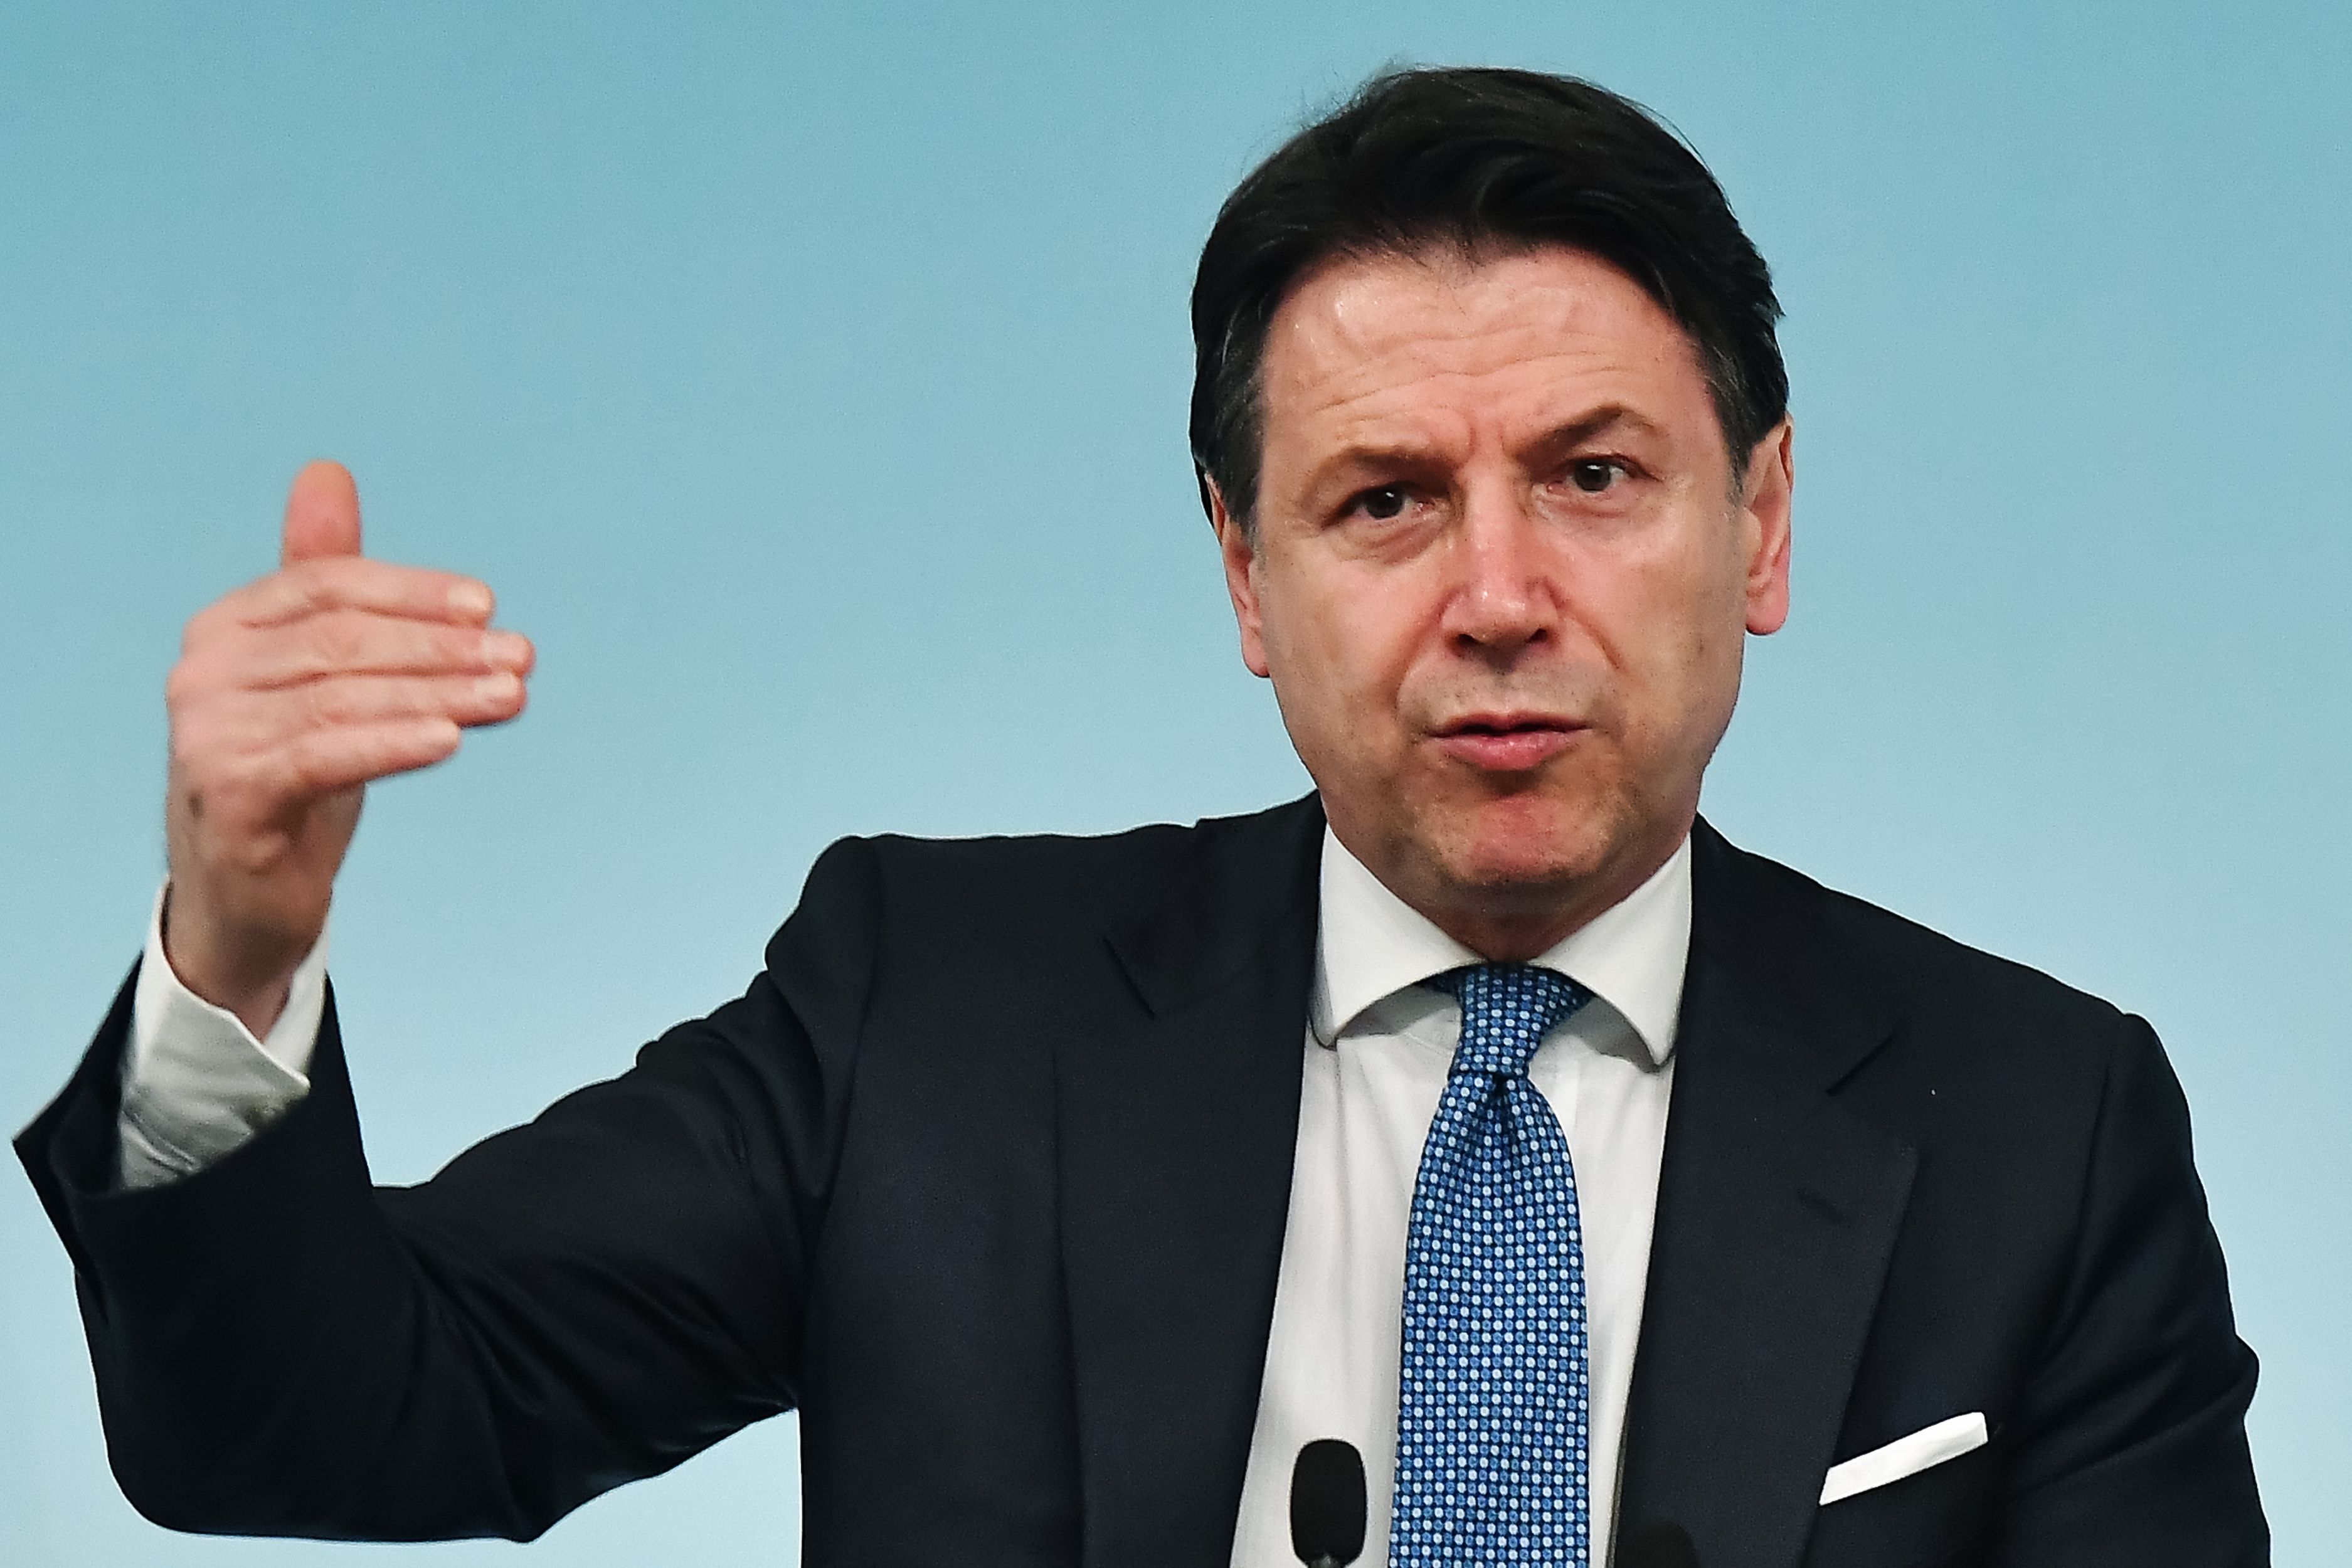 Italian Prime Minister Giuseppe Conte speaks during a press conference in Rome, Italy, on March 4.